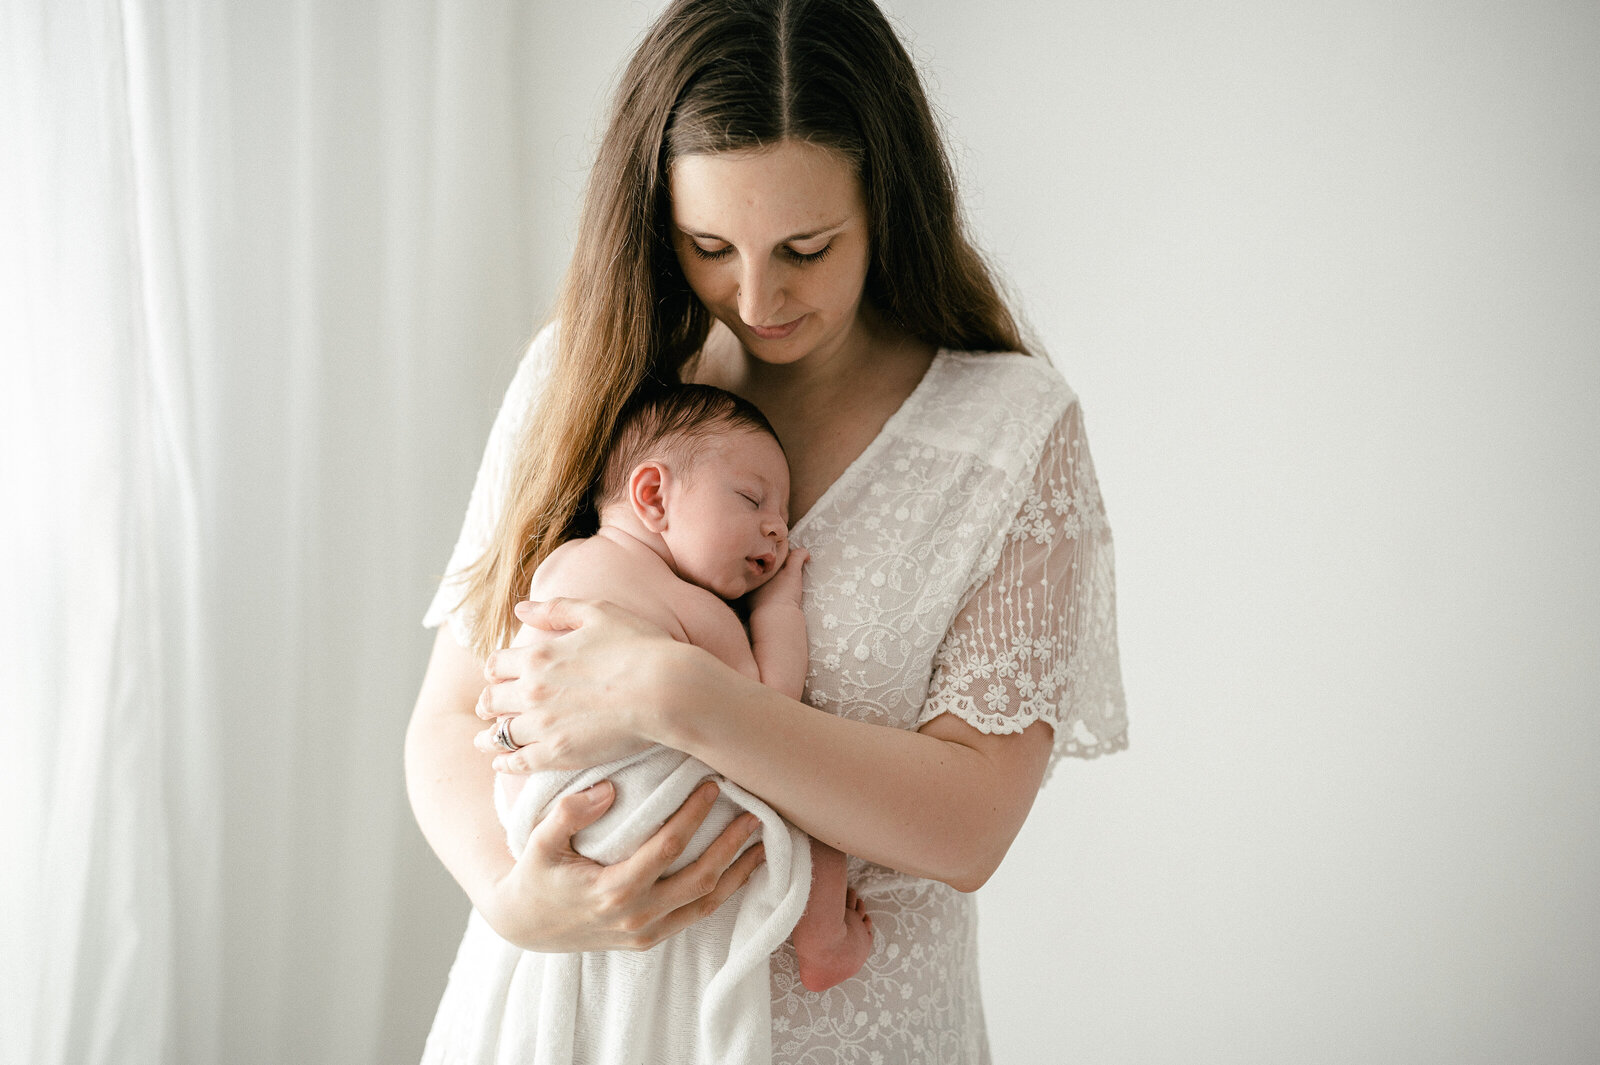 Mother cuddles her newborn baby during her photography photoshoot